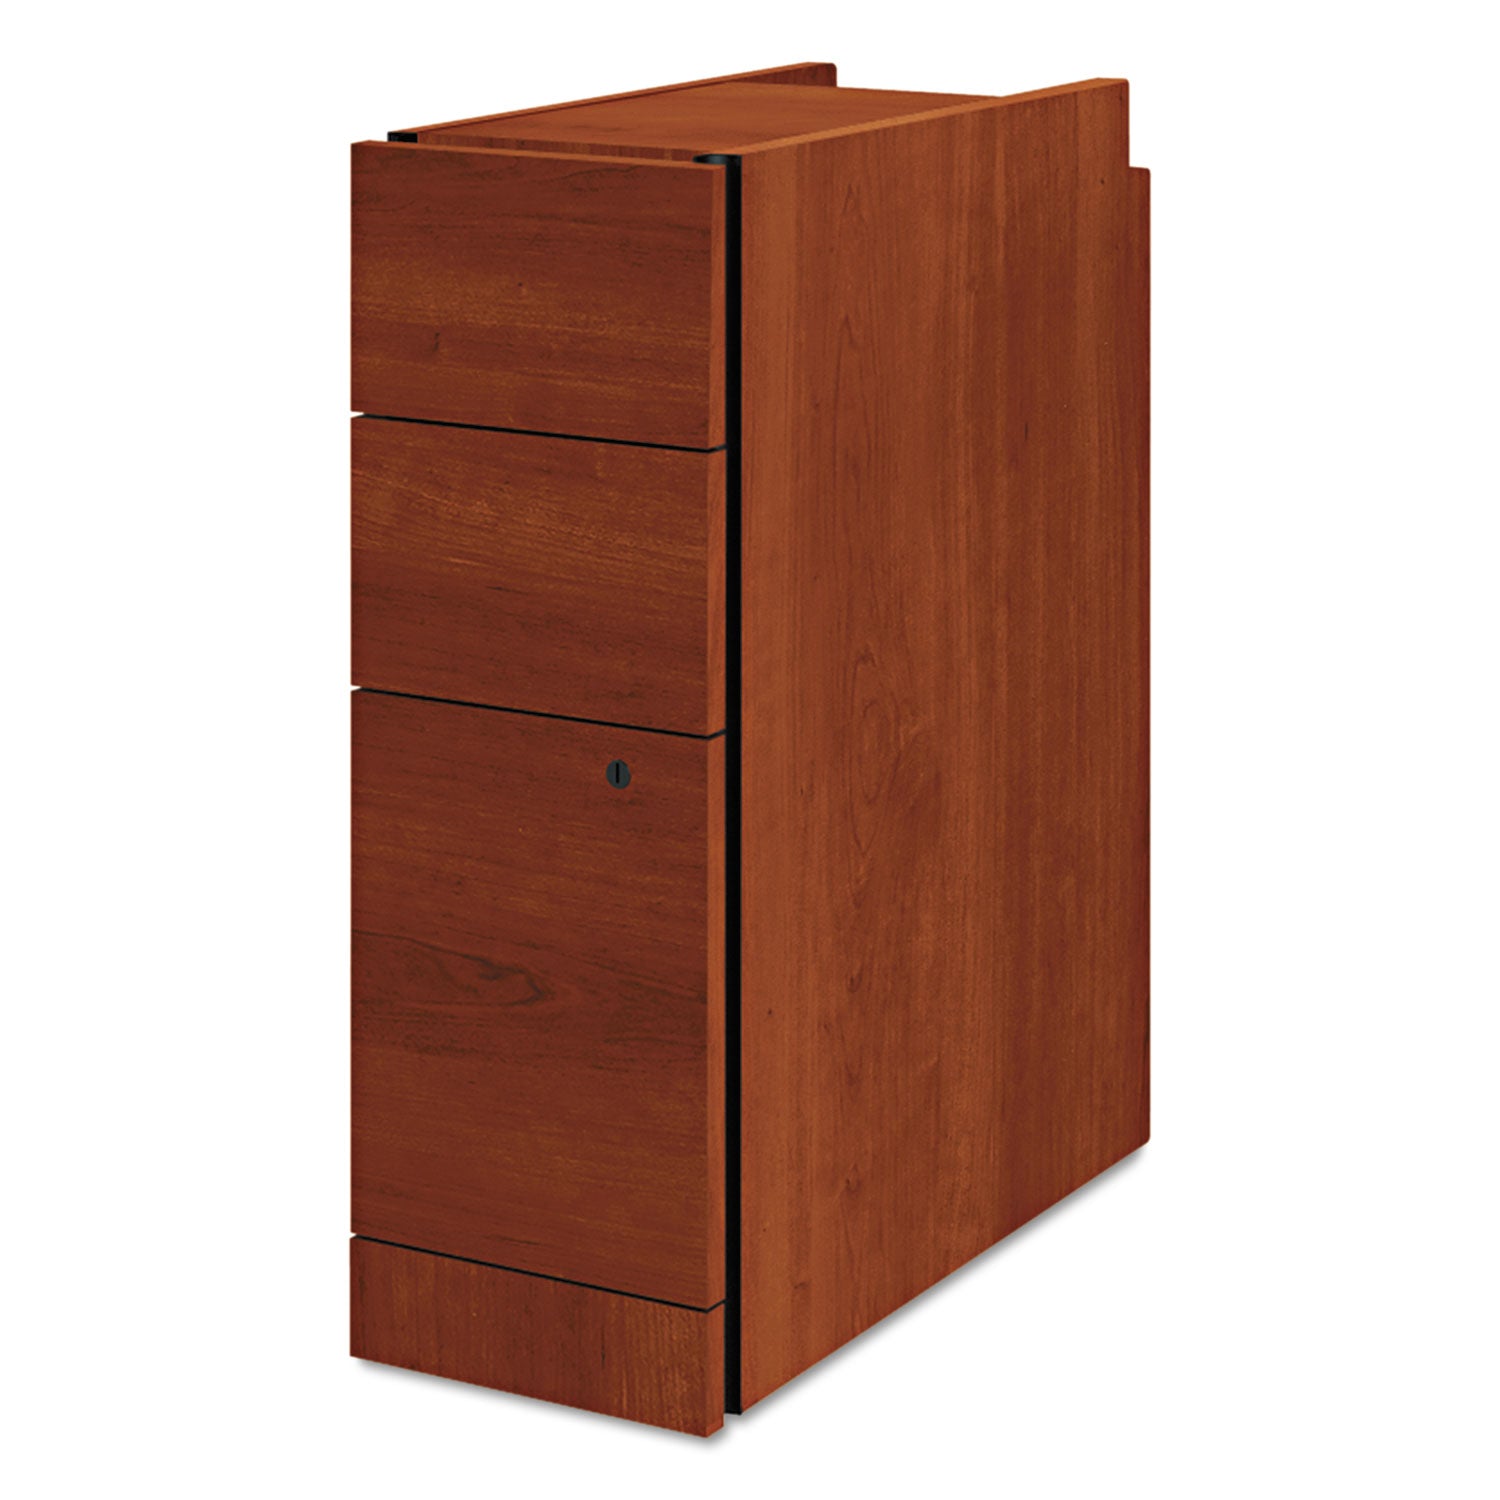 Narrow Pedestal, Left or Right, 3-Drawers: Box/Box/File, Legal/Letter, Cognac, 9.5" x 22.75" x 28 - 